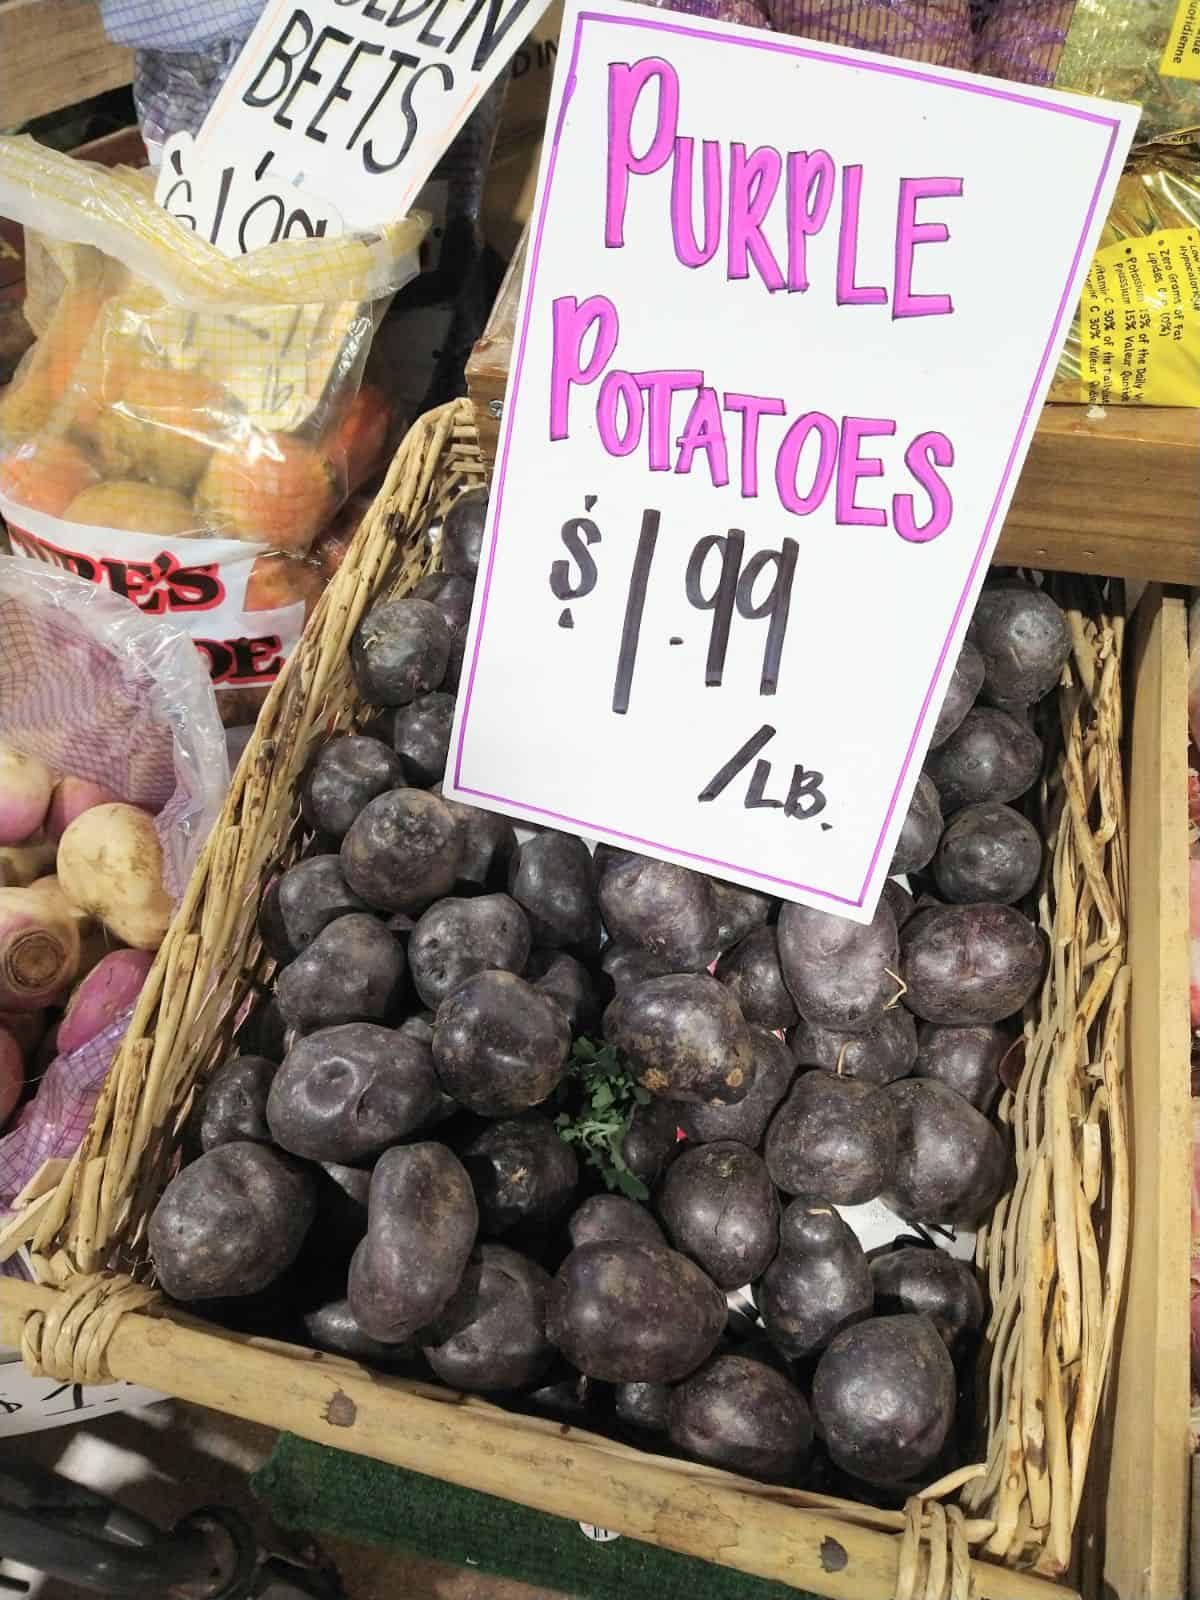 A basket of purple potatoes' with a white sign that says they are $1.99 a pound.